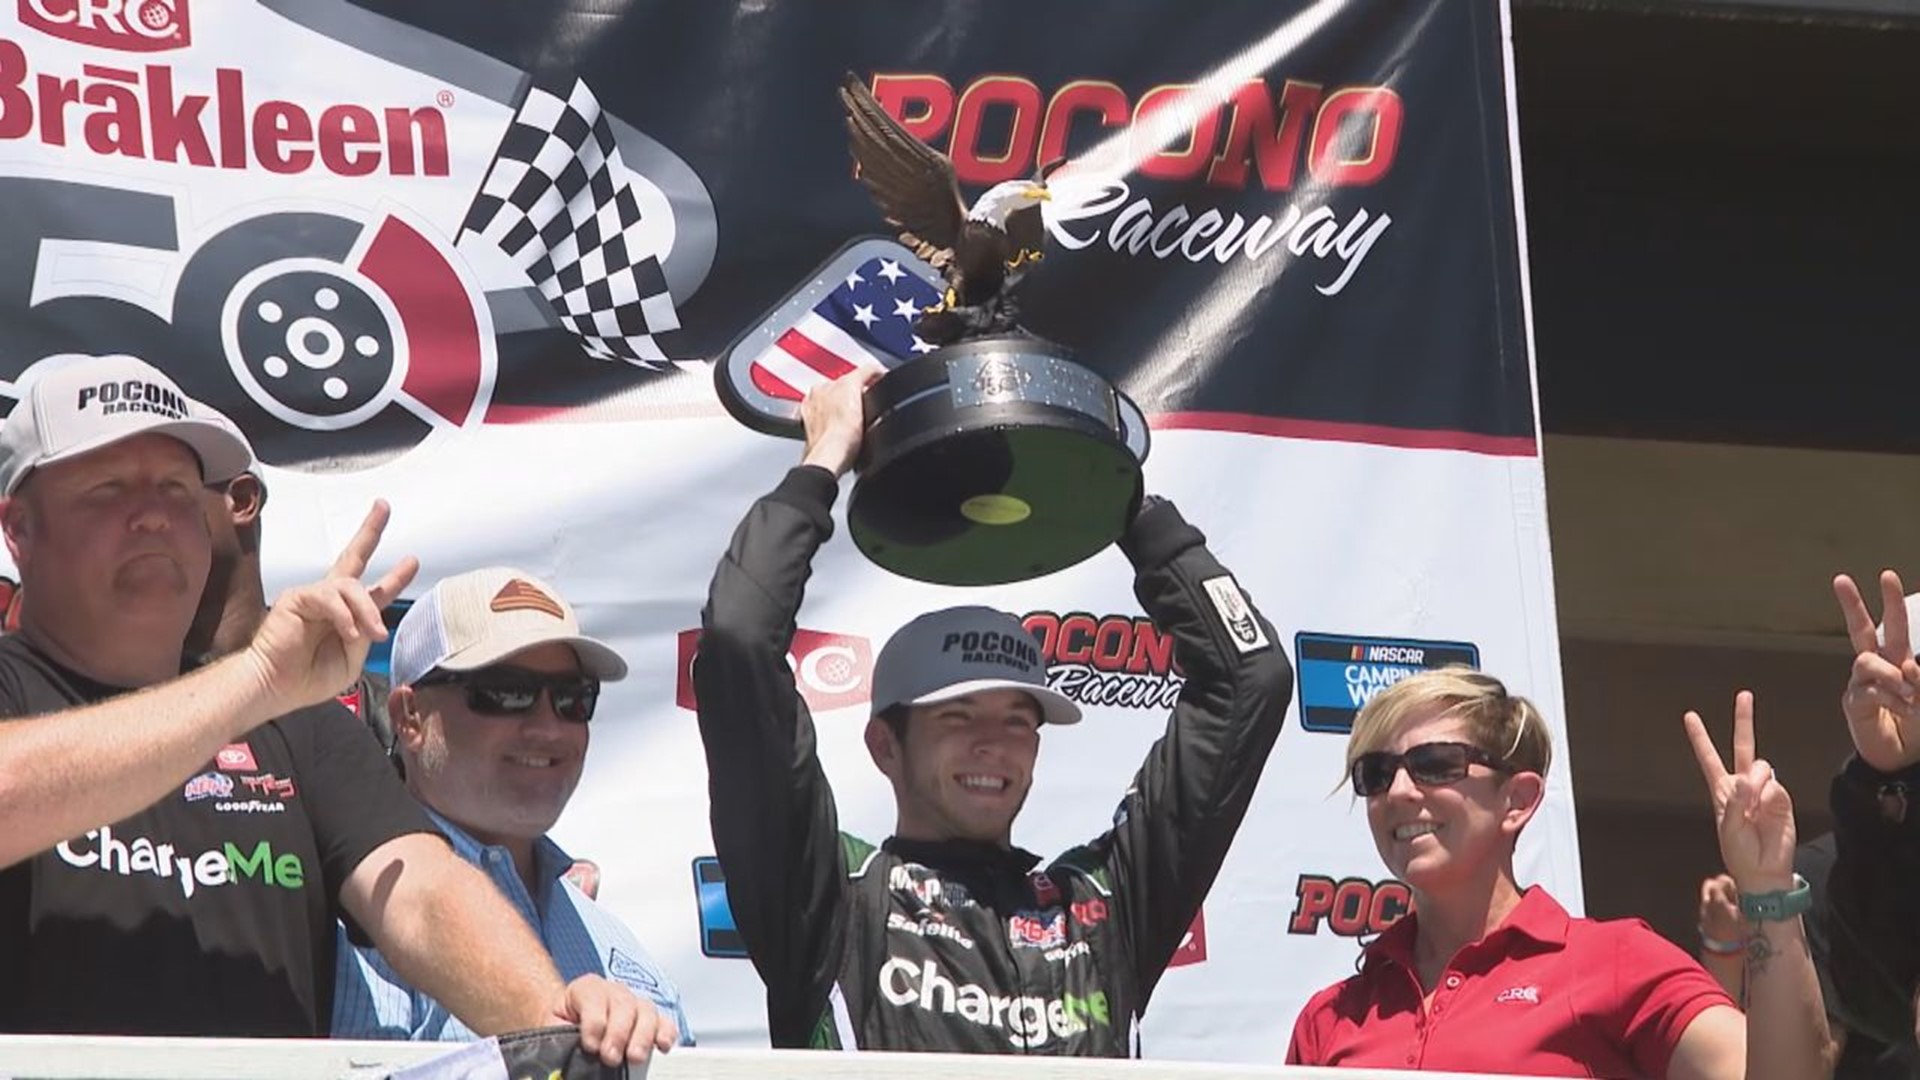 With a baby on the way and driving a new truck, Chandler Smith Secured a playoff spot, taking the checkered flag at Pocono